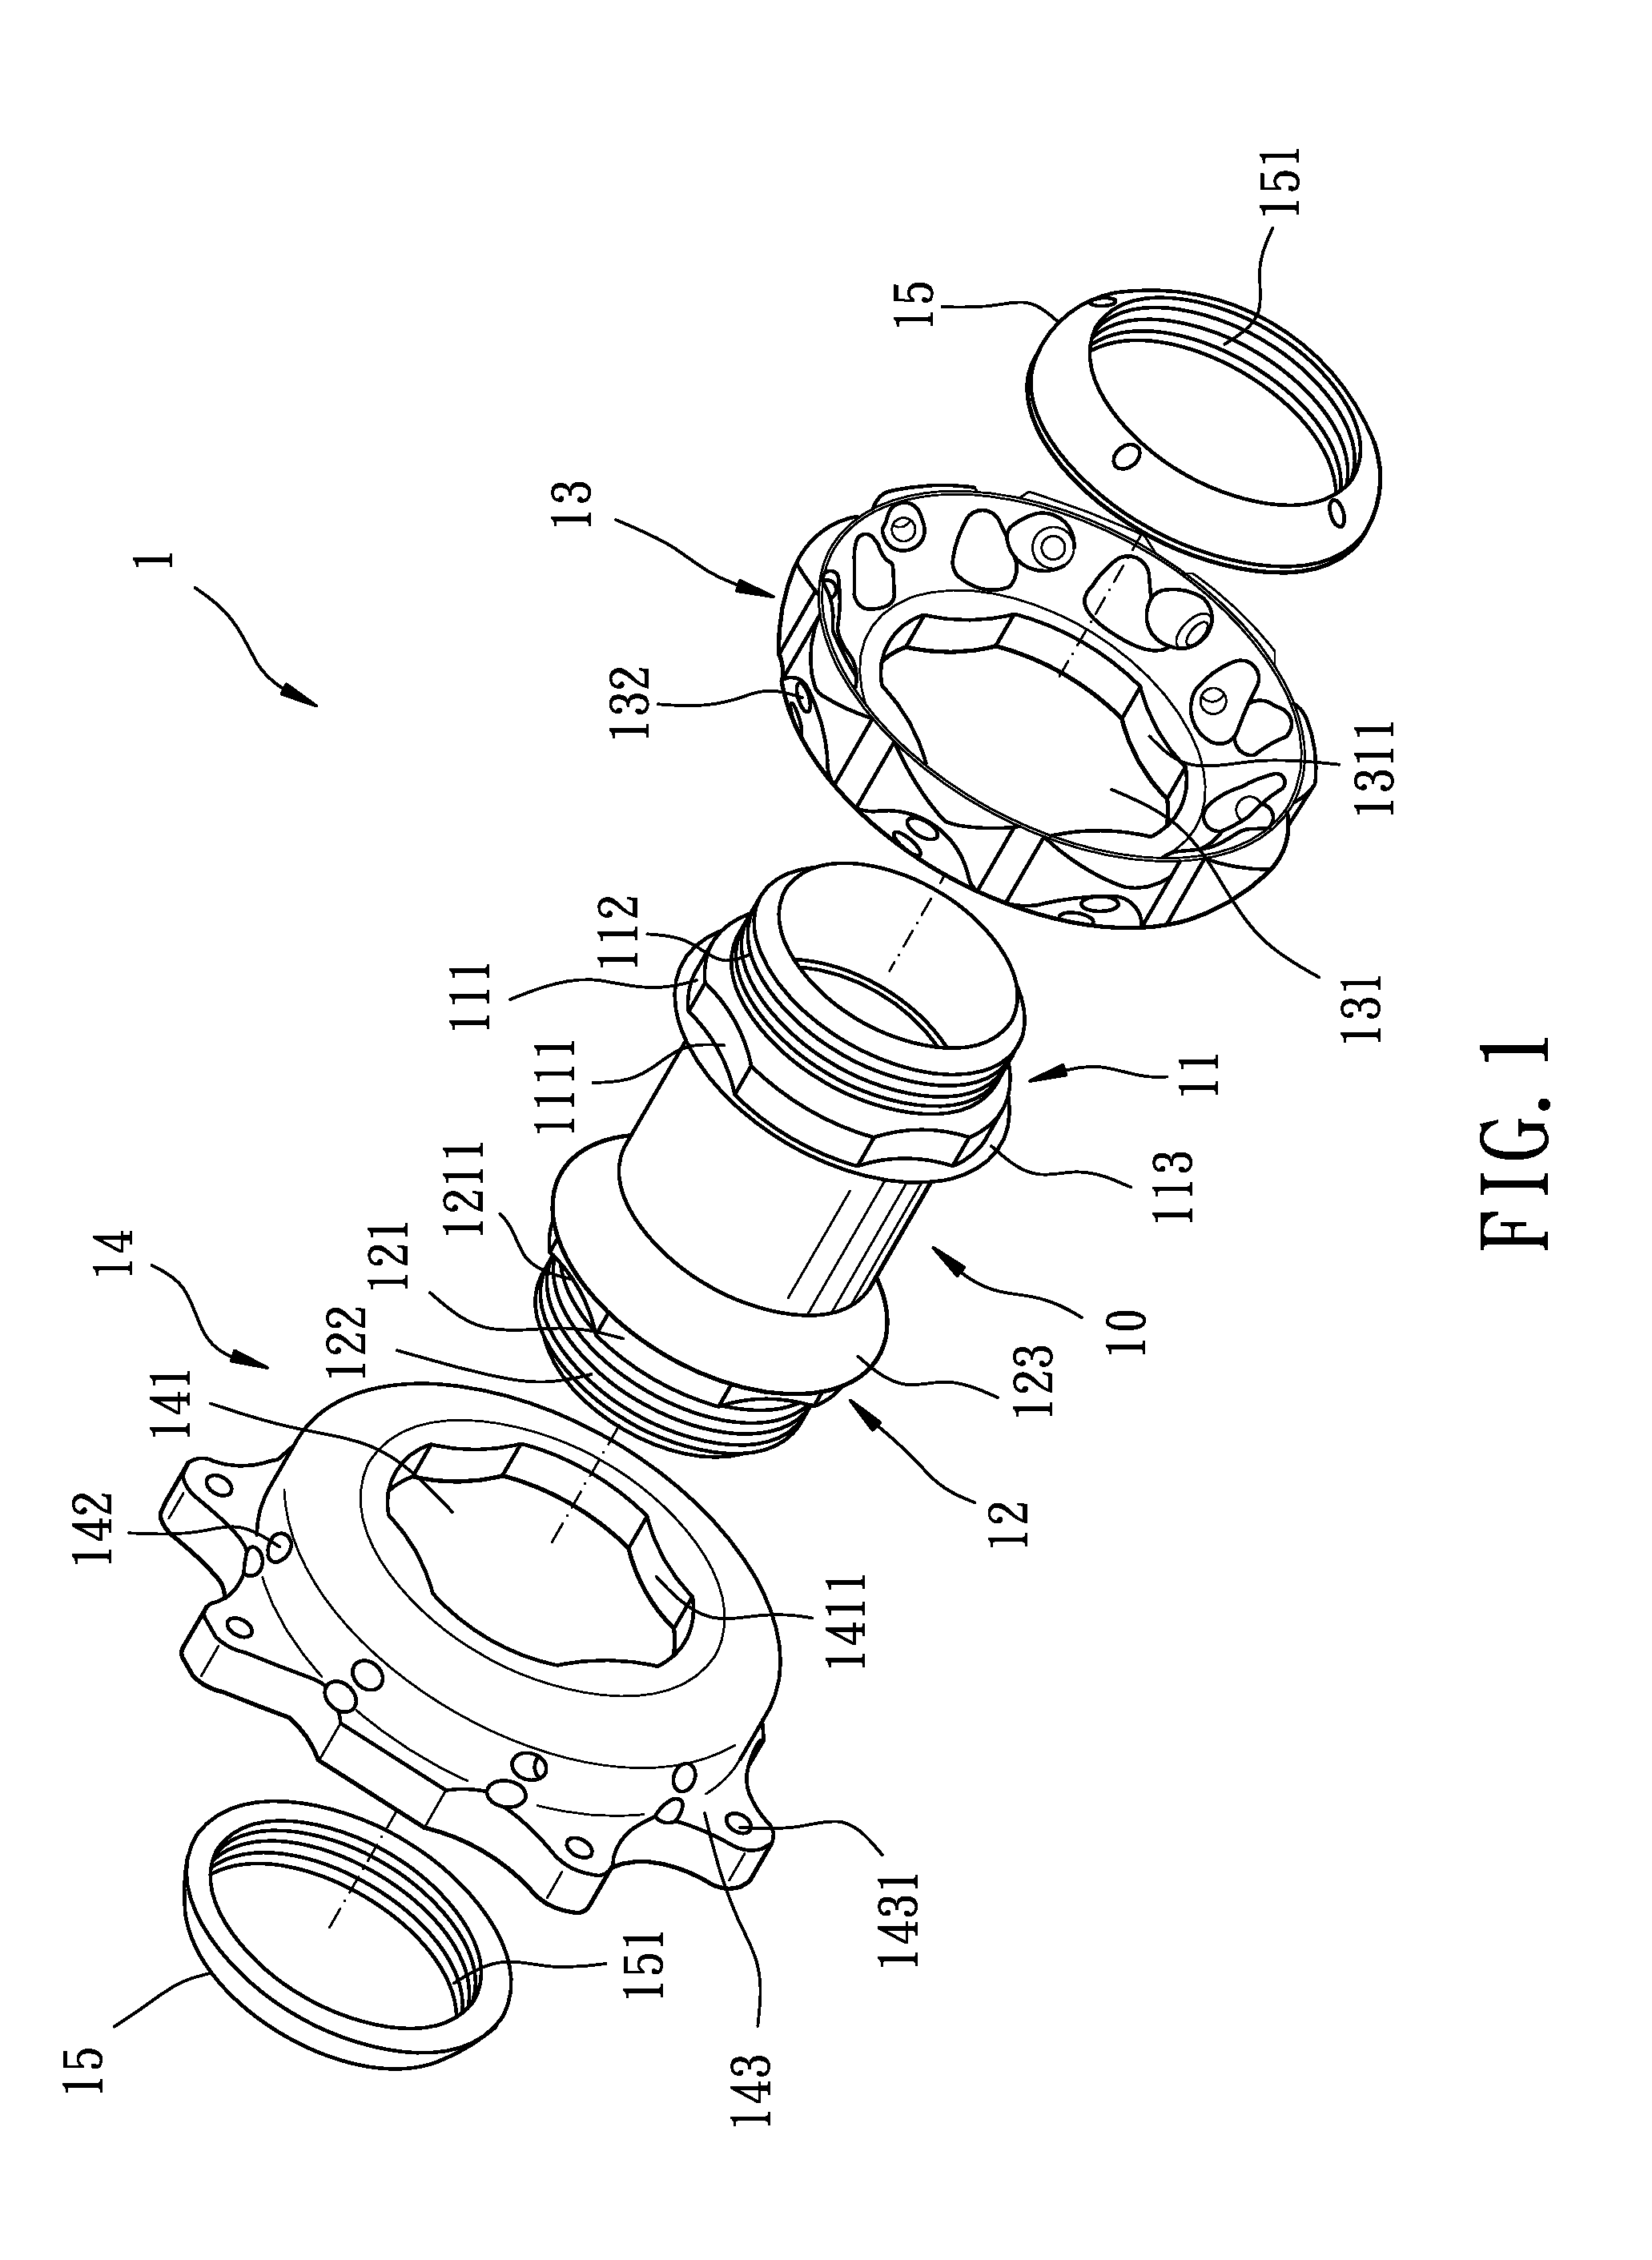 Hub for off-road motorcycle